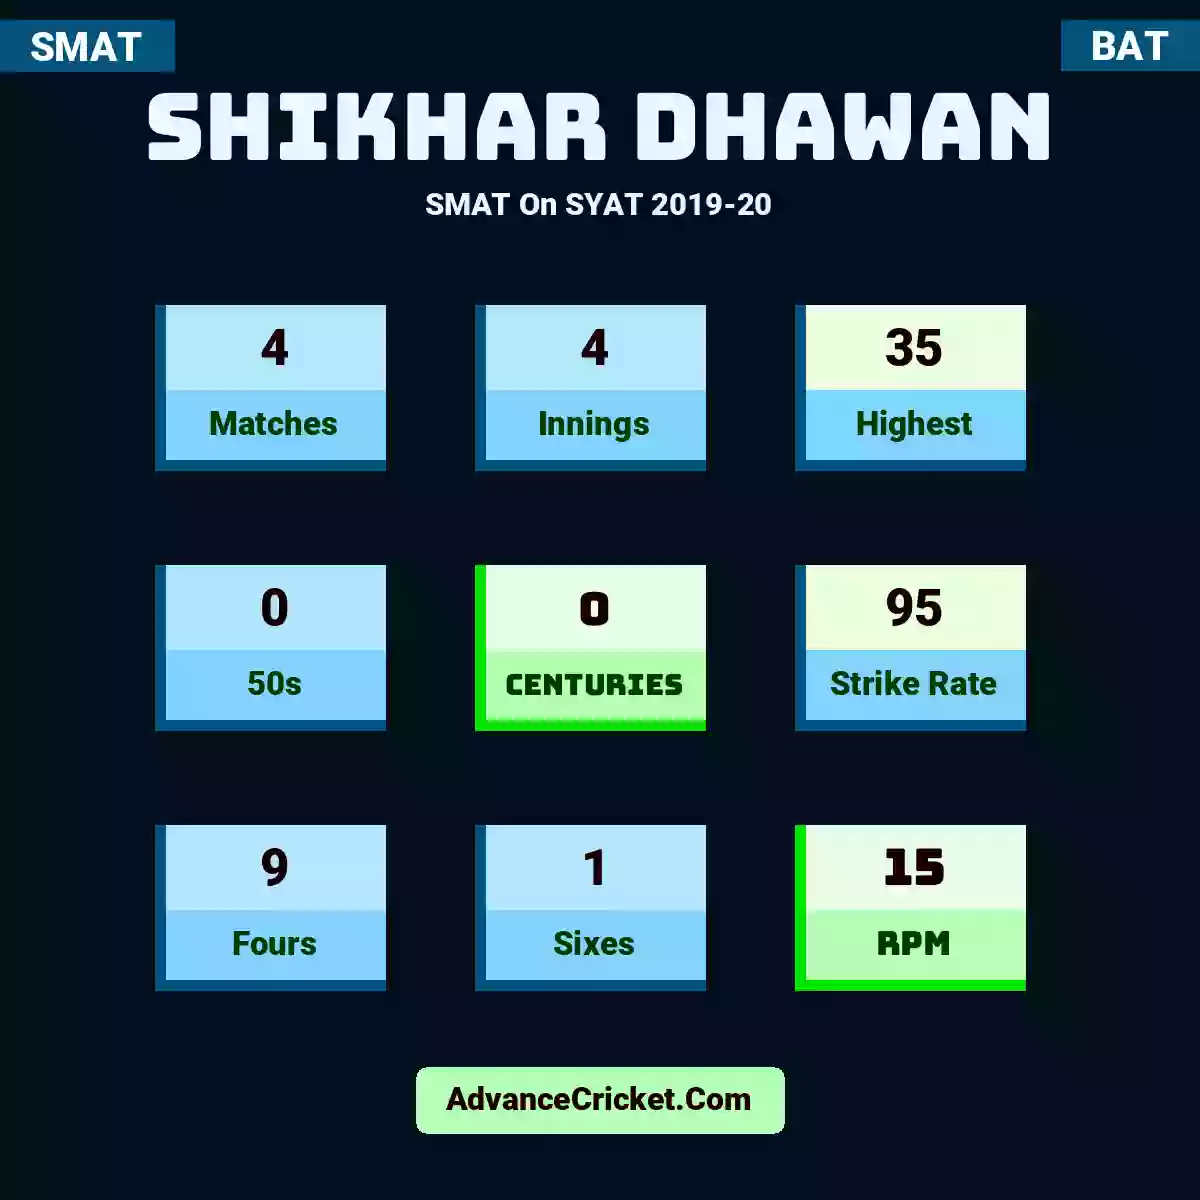 Shikhar Dhawan SMAT  On SYAT 2019-20, Shikhar Dhawan played 4 matches, scored 35 runs as highest, 0 half-centuries, and 0 centuries, with a strike rate of 95. S.Dhawan hit 9 fours and 1 sixes, with an RPM of 15.